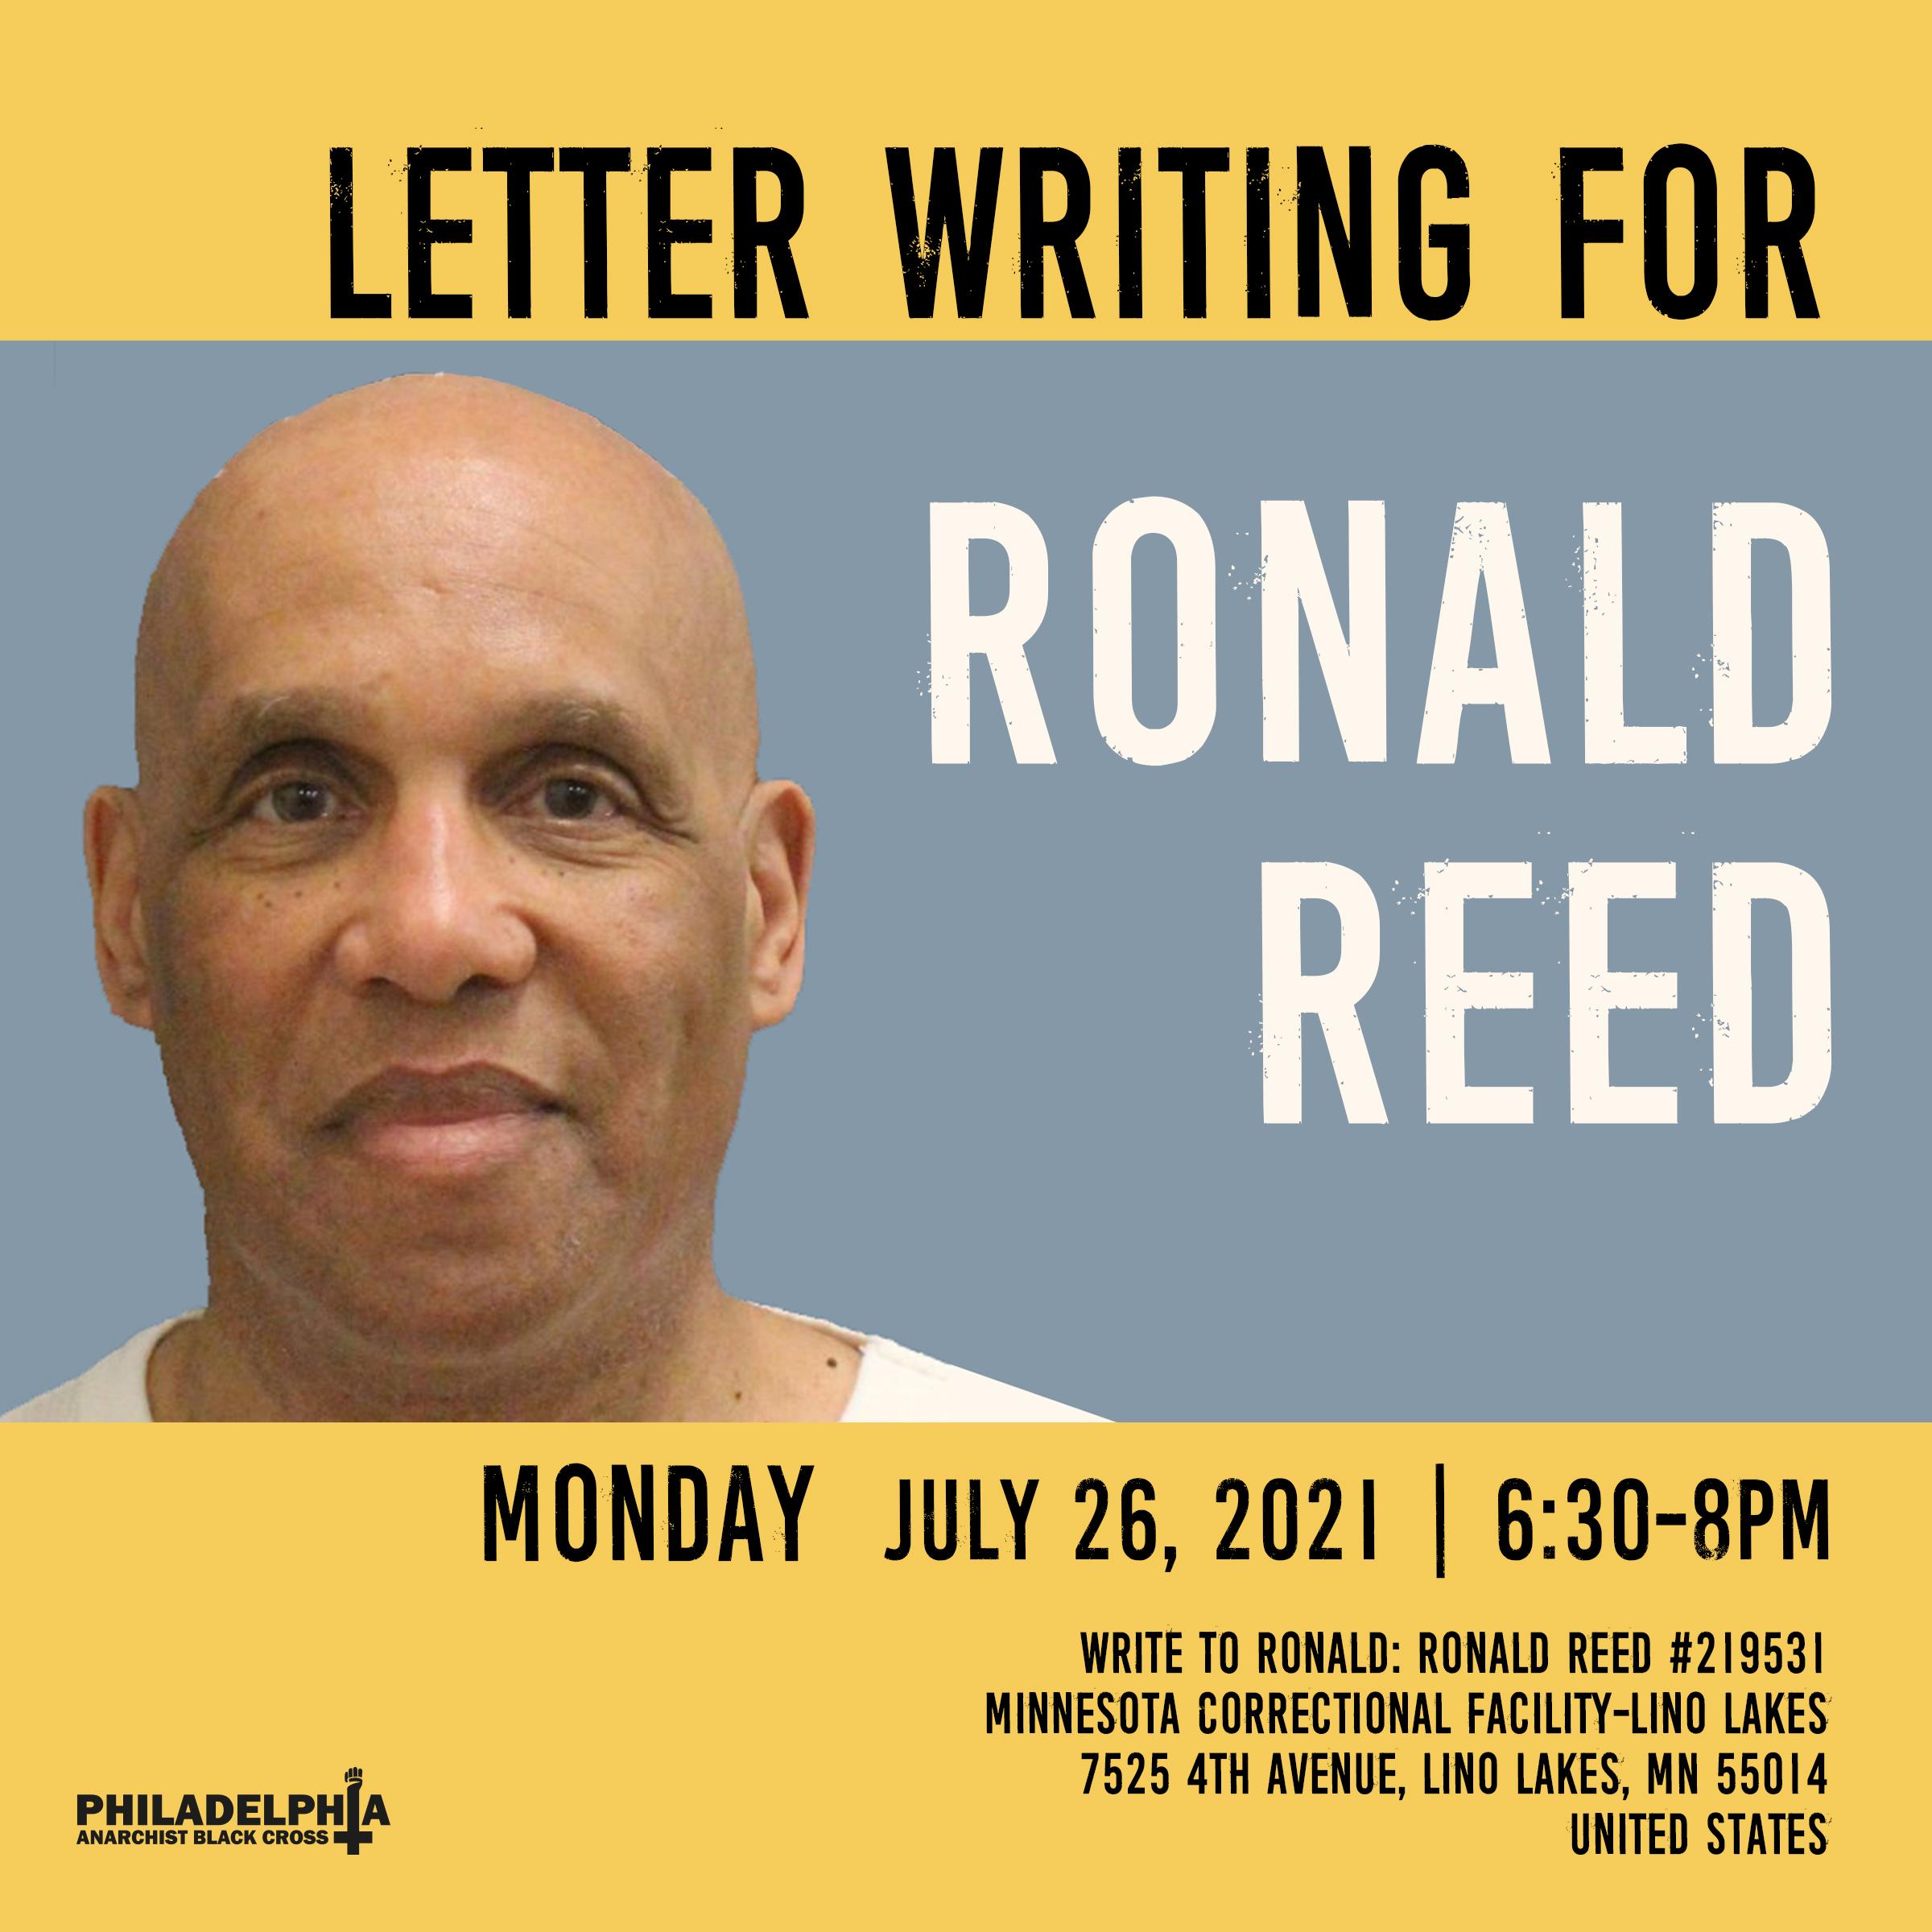 Monday July 26th: Letter-writing for Ronald Reed